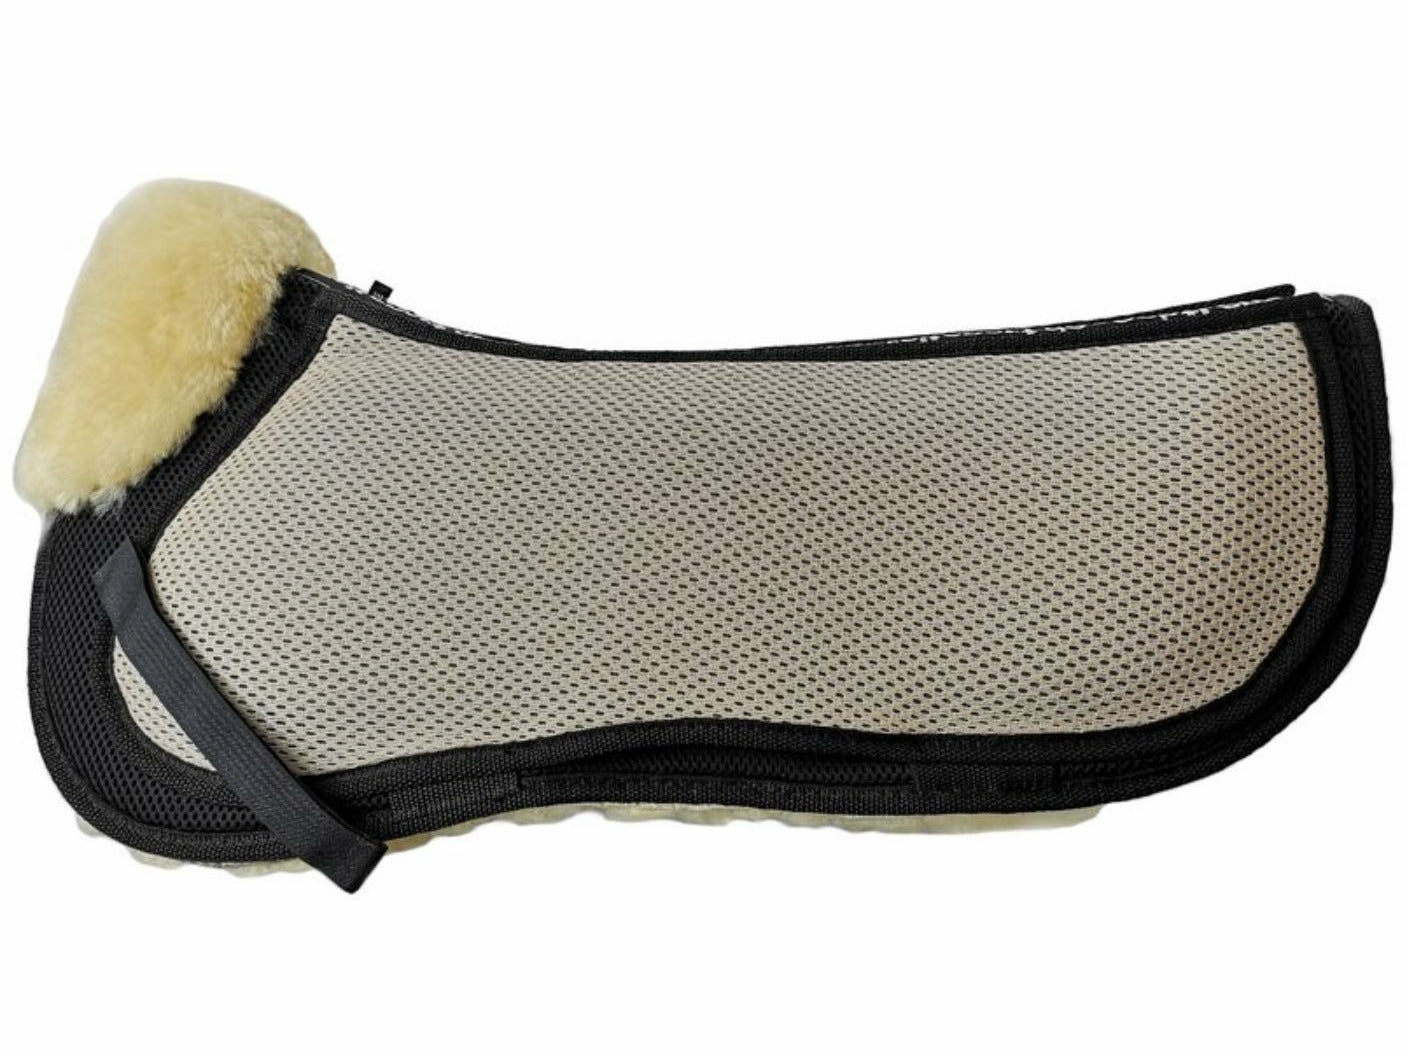 Engel - AirTec Plus lambskin saddle cushion can be upholstered with functional fabric